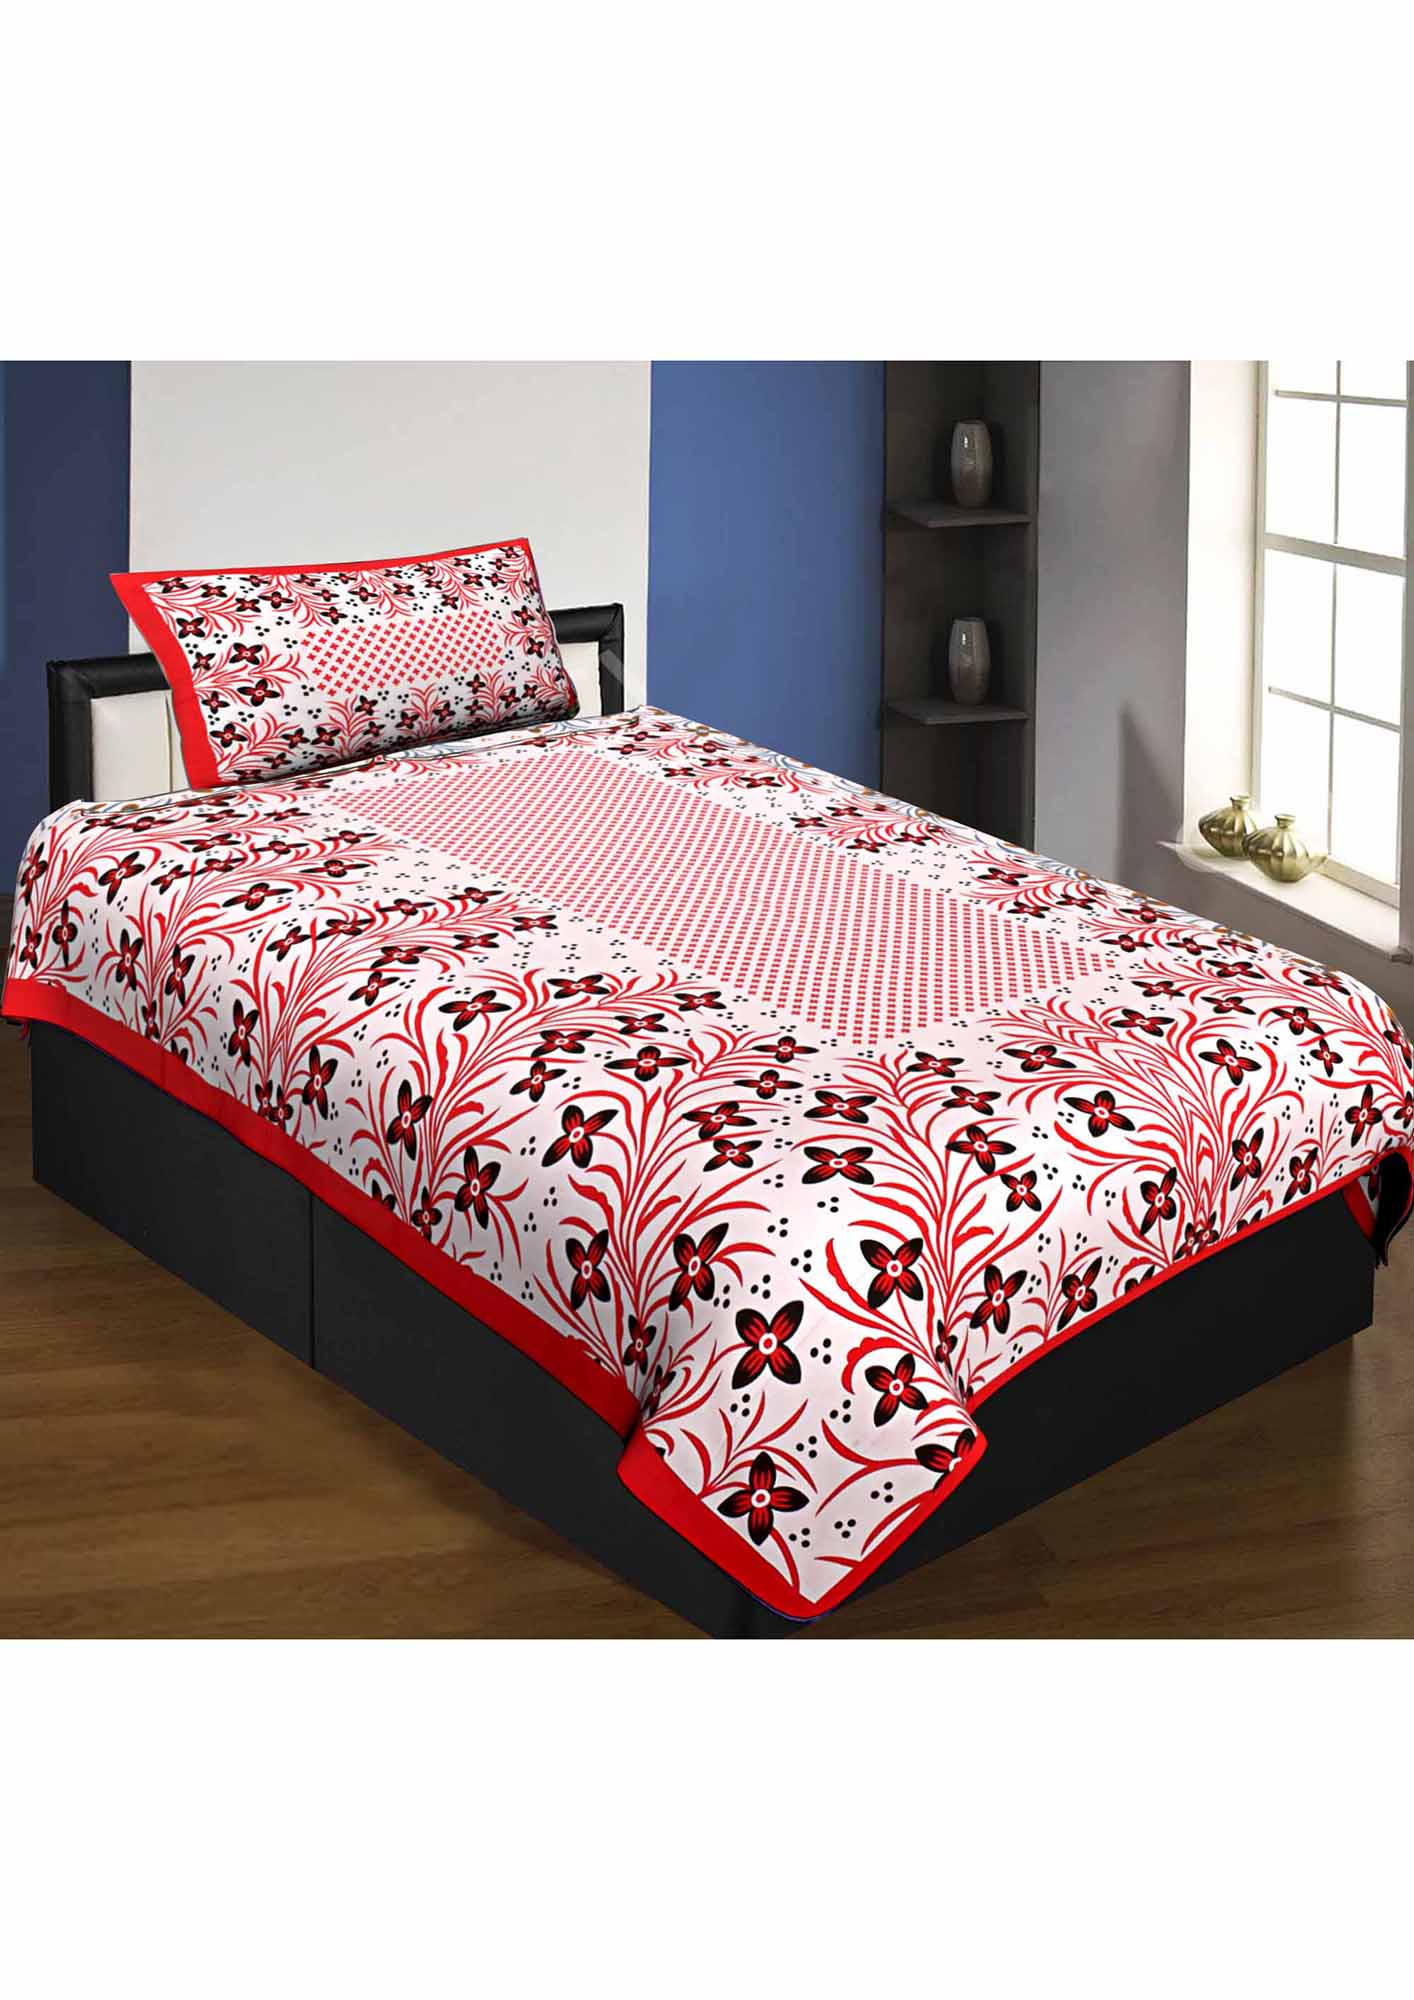 Single Bedsheet Pure Cotton Premium Red Border with Flower and Leaf Pattern